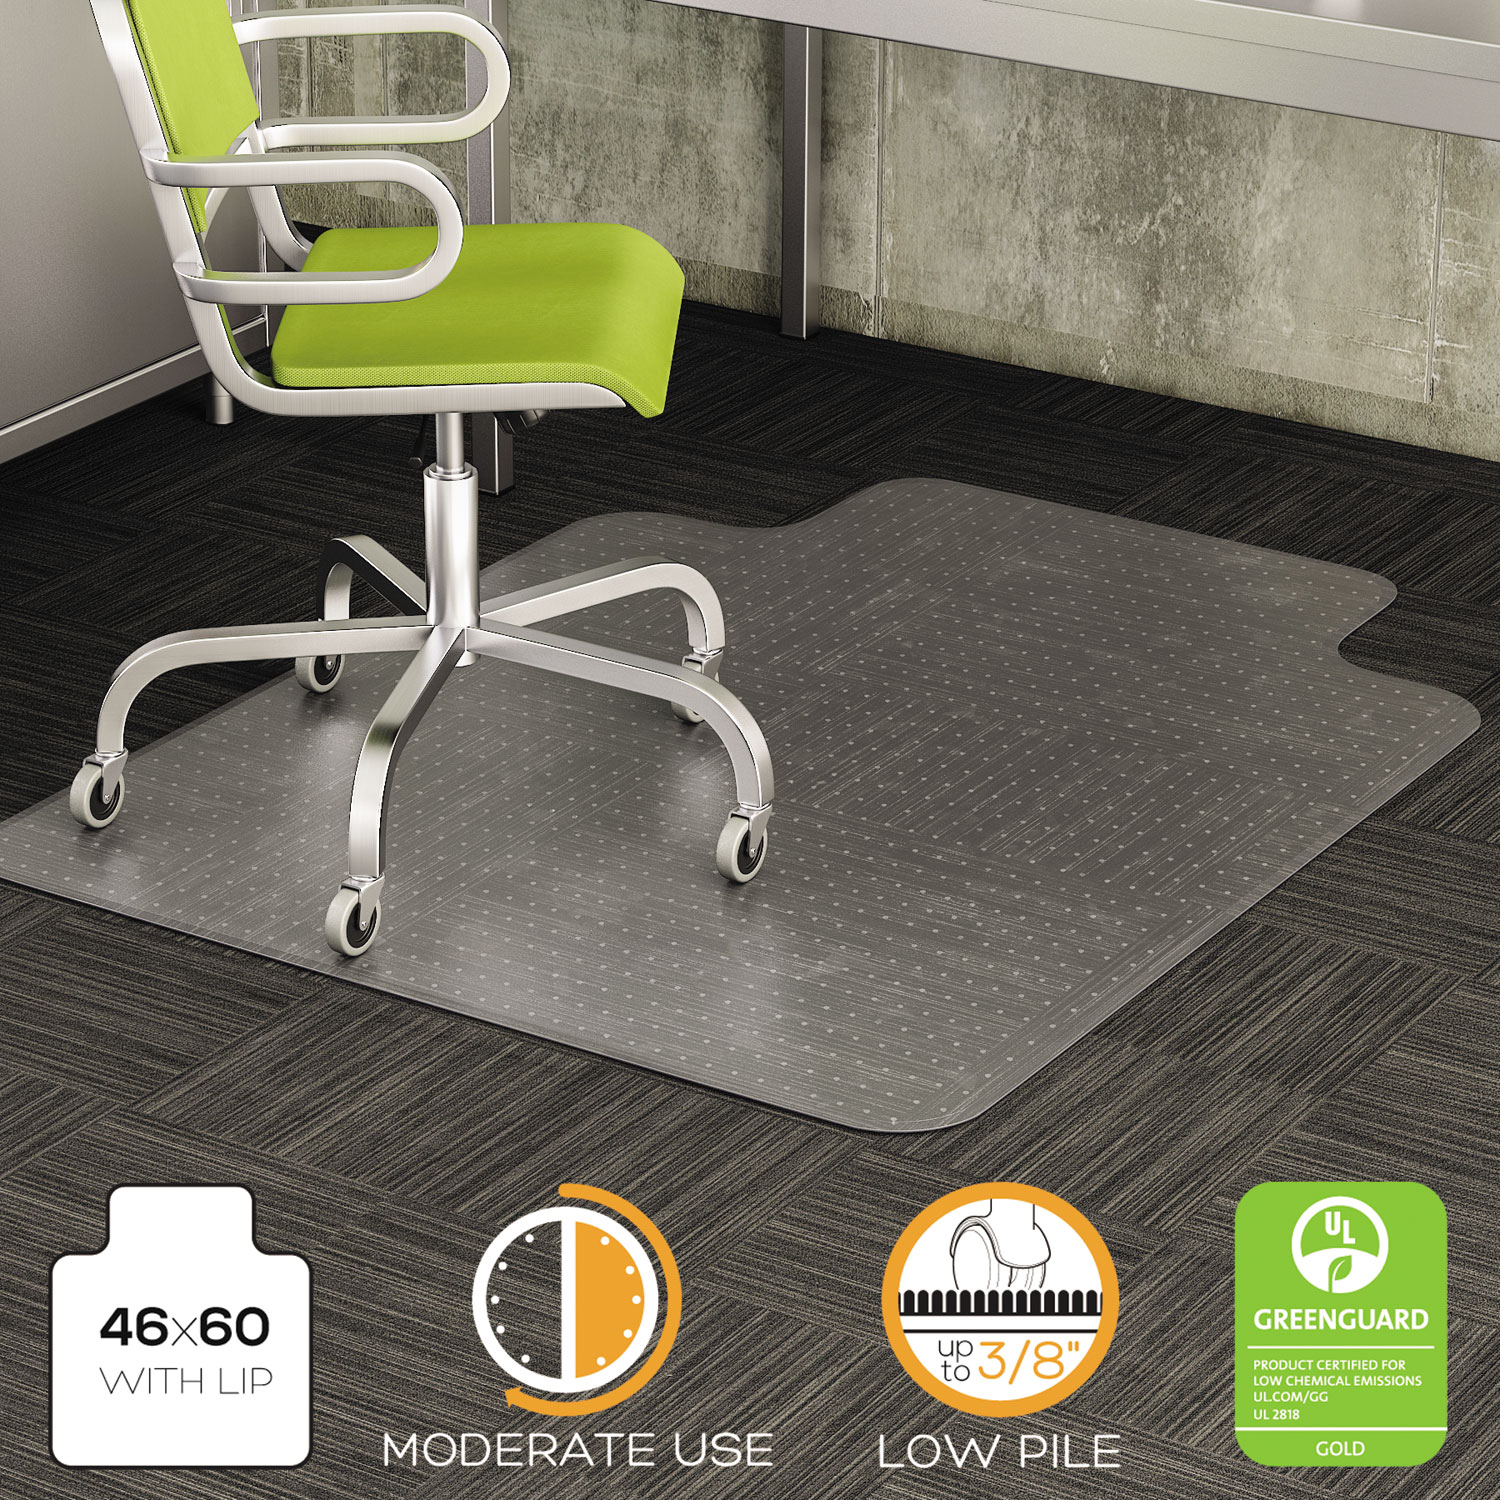  deflecto CM13433F DuraMat Moderate Use Chair Mat for Low Pile Carpet, 46 x 60, Wide Lipped, Clear (DEFCM13433F) 